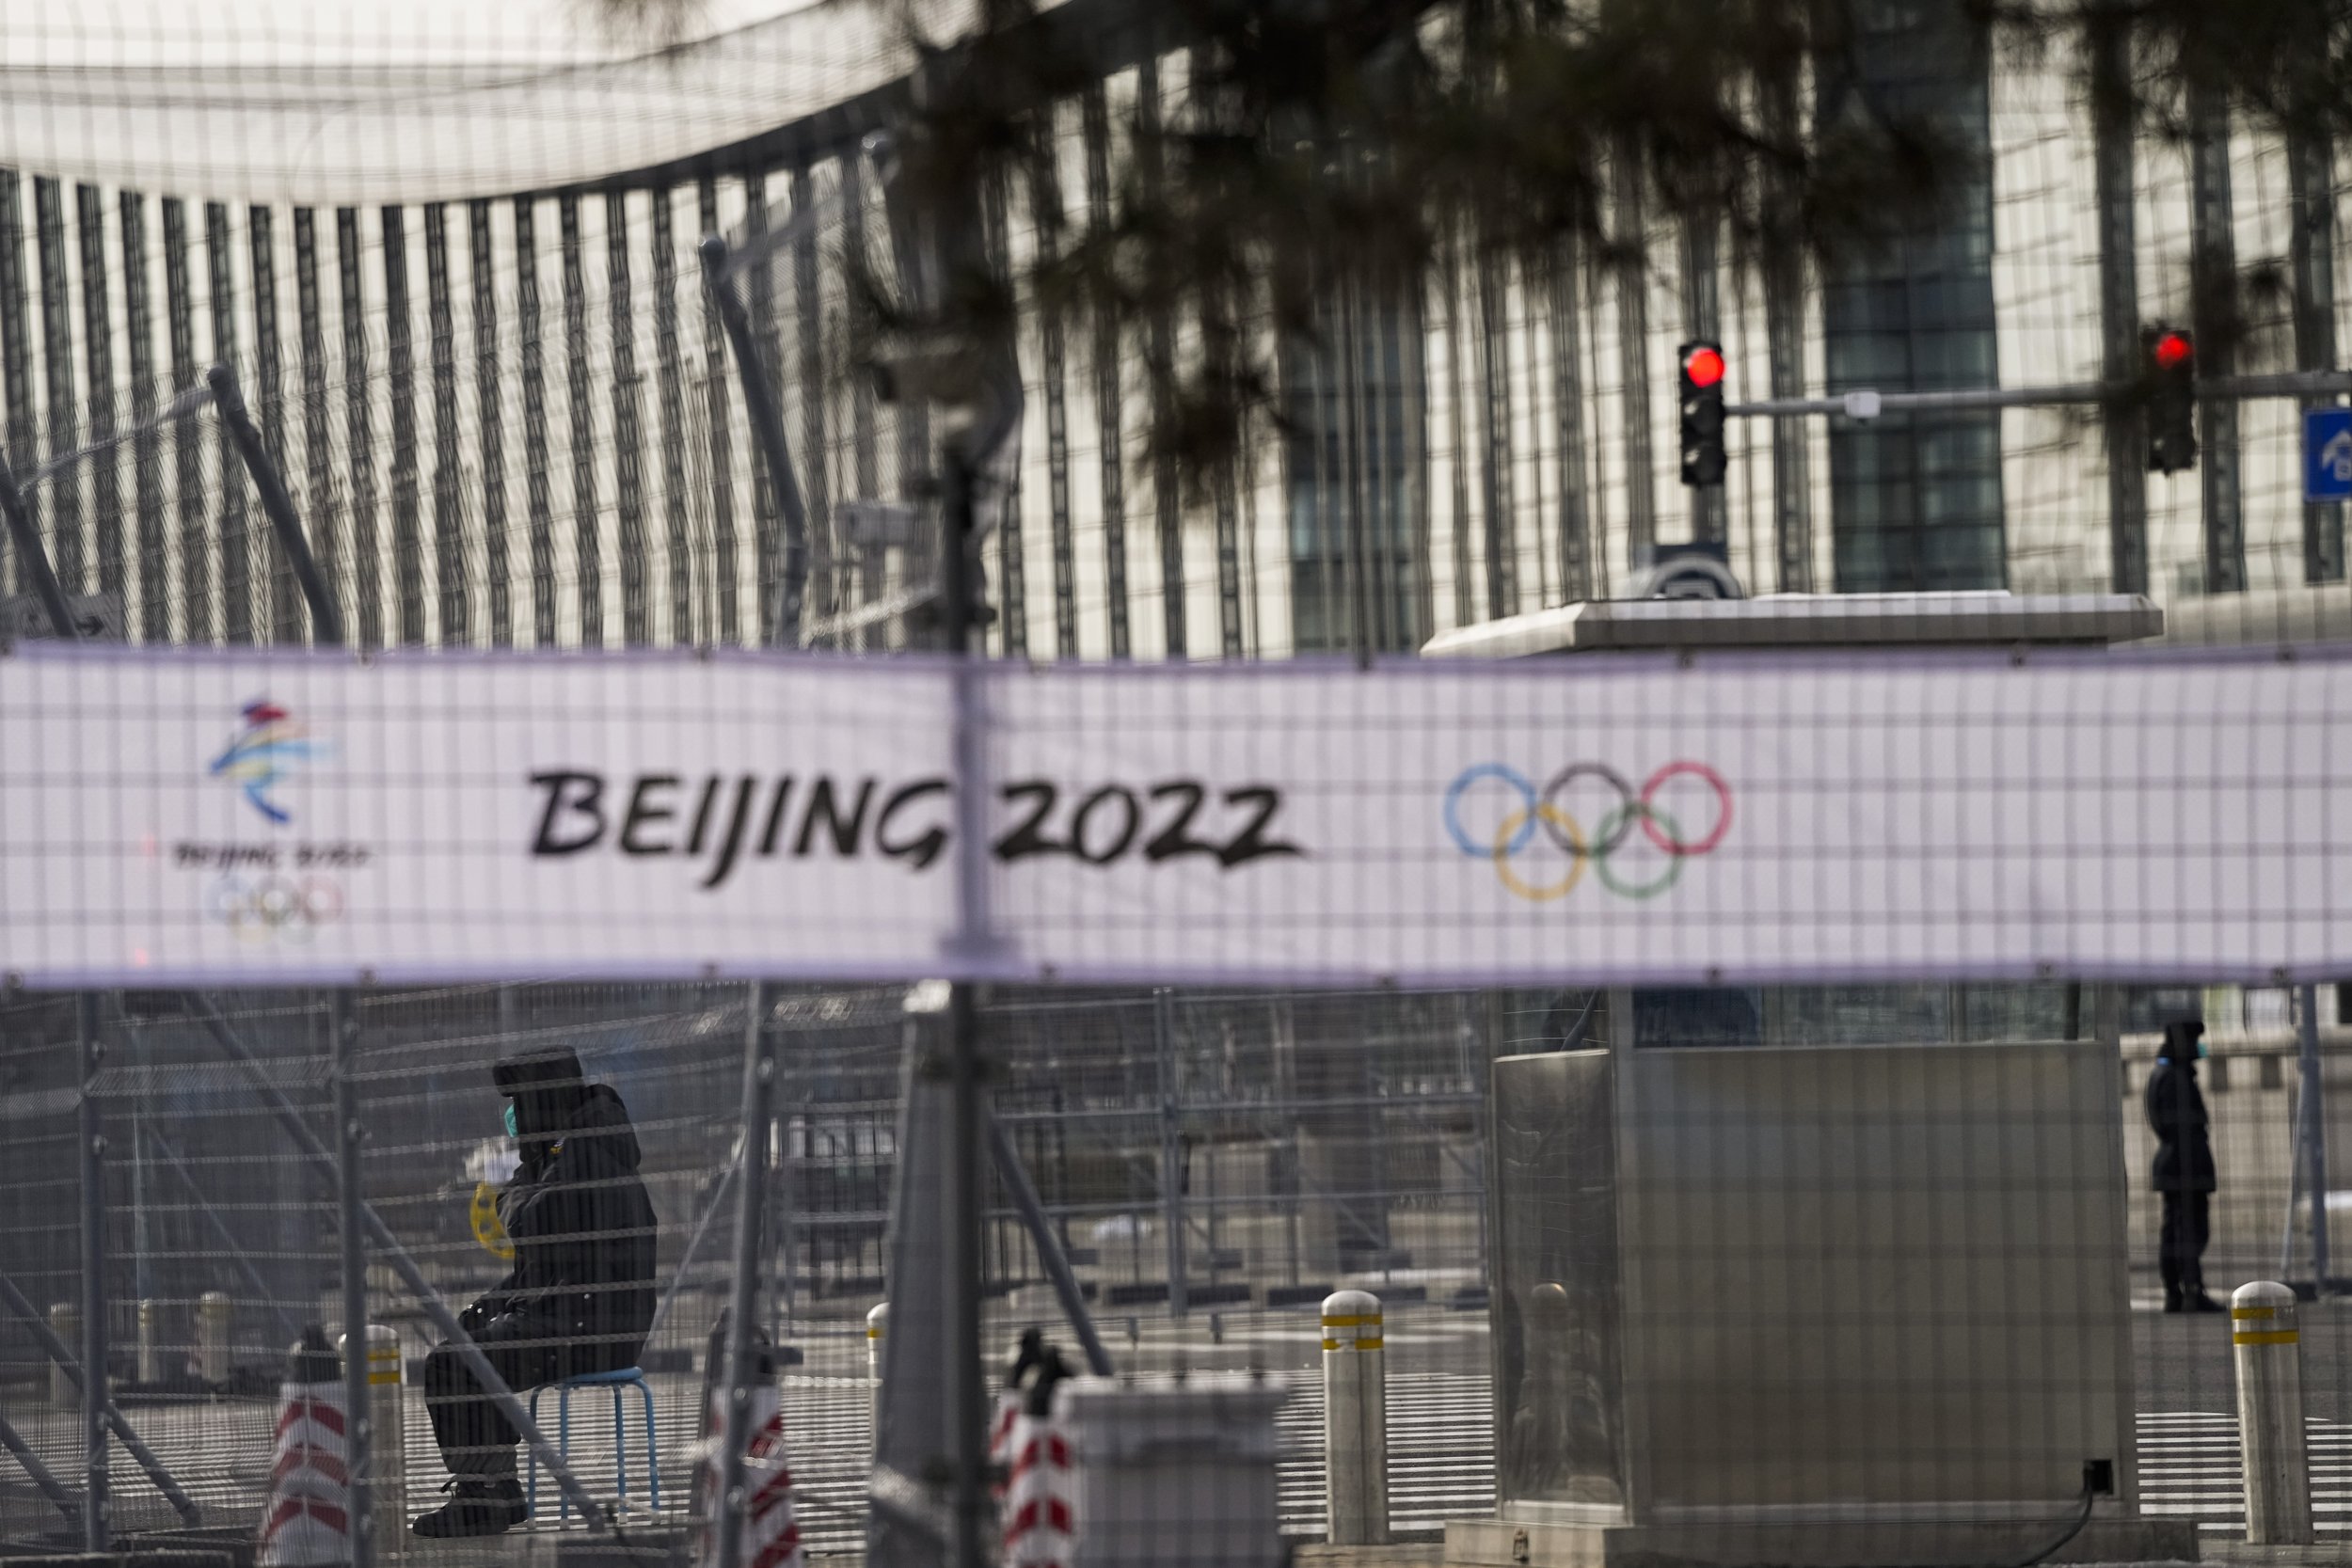  Two security personnel are seen through fences outside the main media center at the 2022 Winter Olympics, Wednesday, Jan. 26, 2022, in Beijing. (AP Photo/Jae C. Hong) 